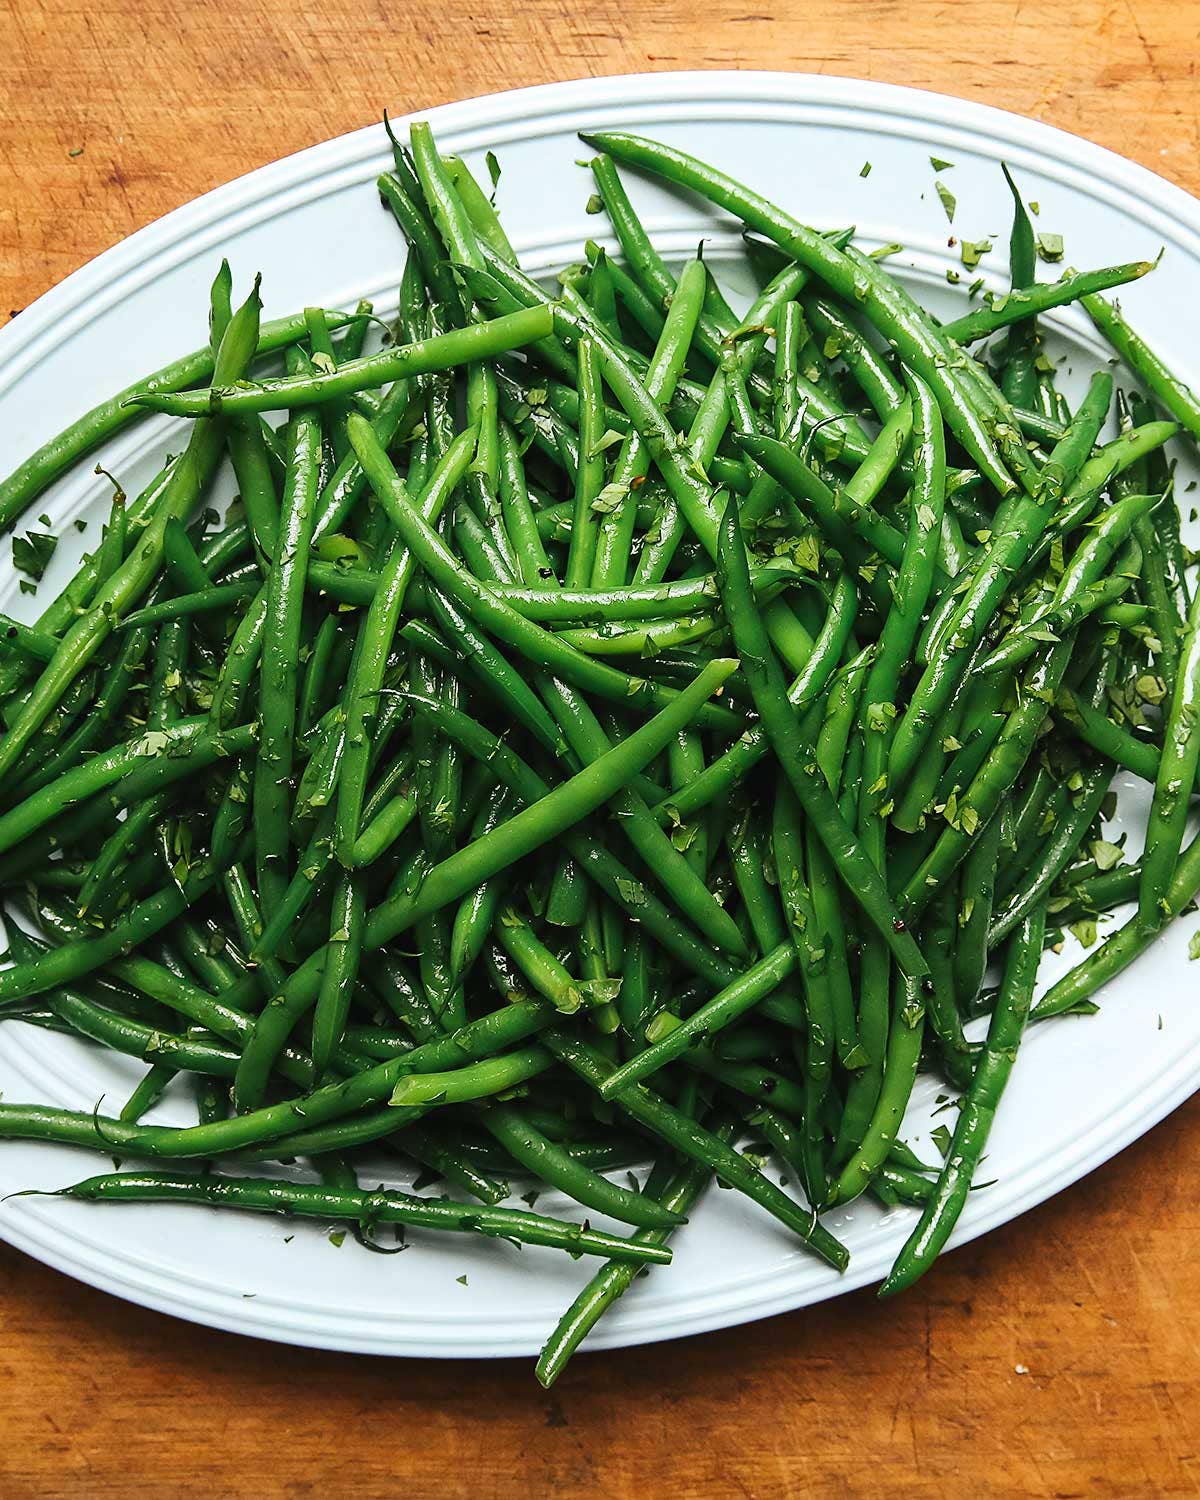 Herbed Hericots Verts